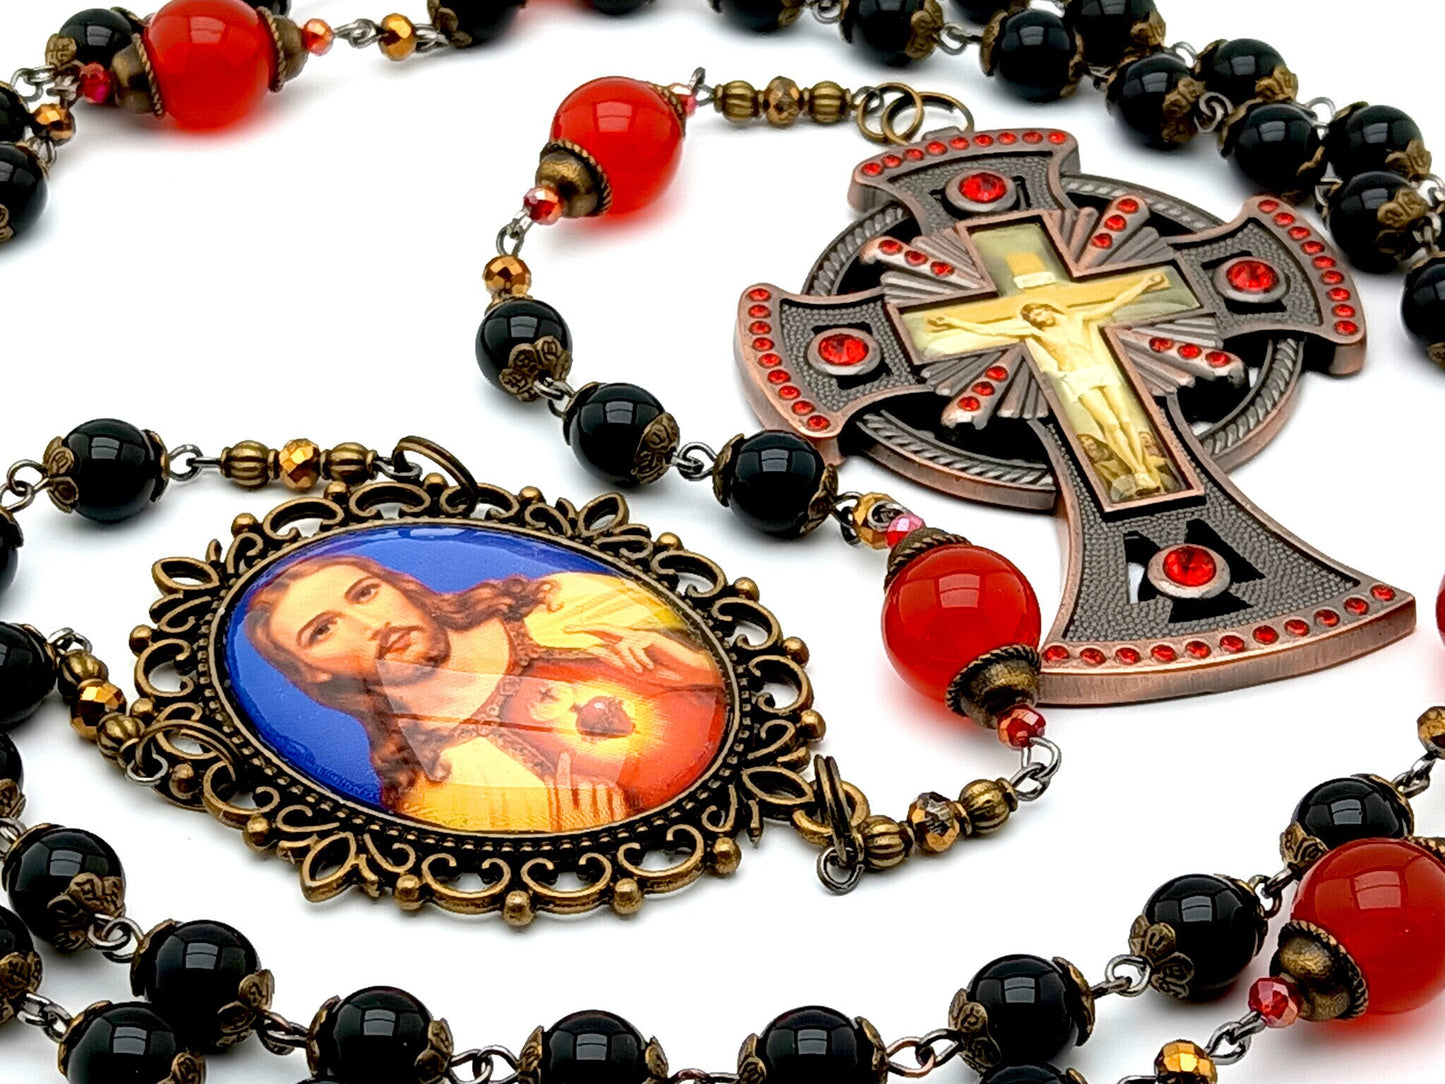 Vintage Sacred Heart of Jesus unique rosary beads with onyx and red jasper gemstone beads, large picture corpus crucifix with red crystal details and picture centre medal.